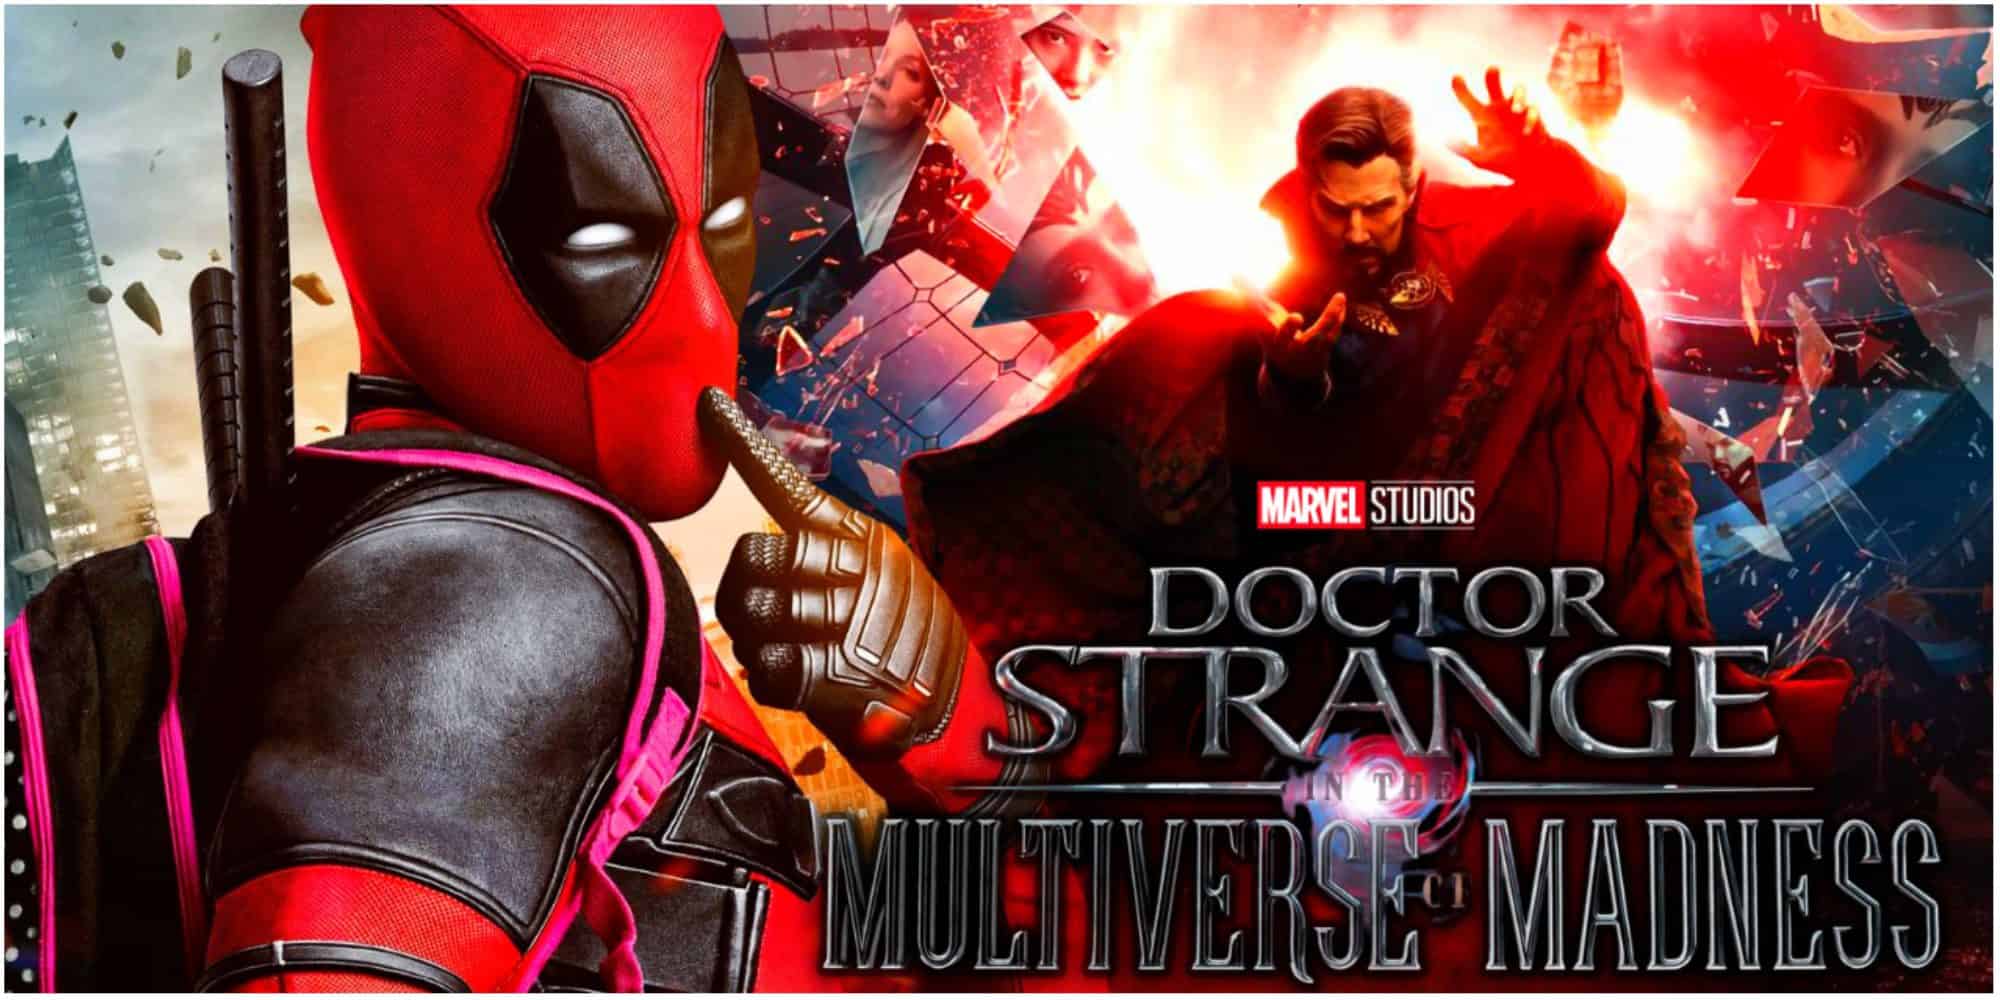 30 Characters Who Can Beat Deadpool - Dr. Strange